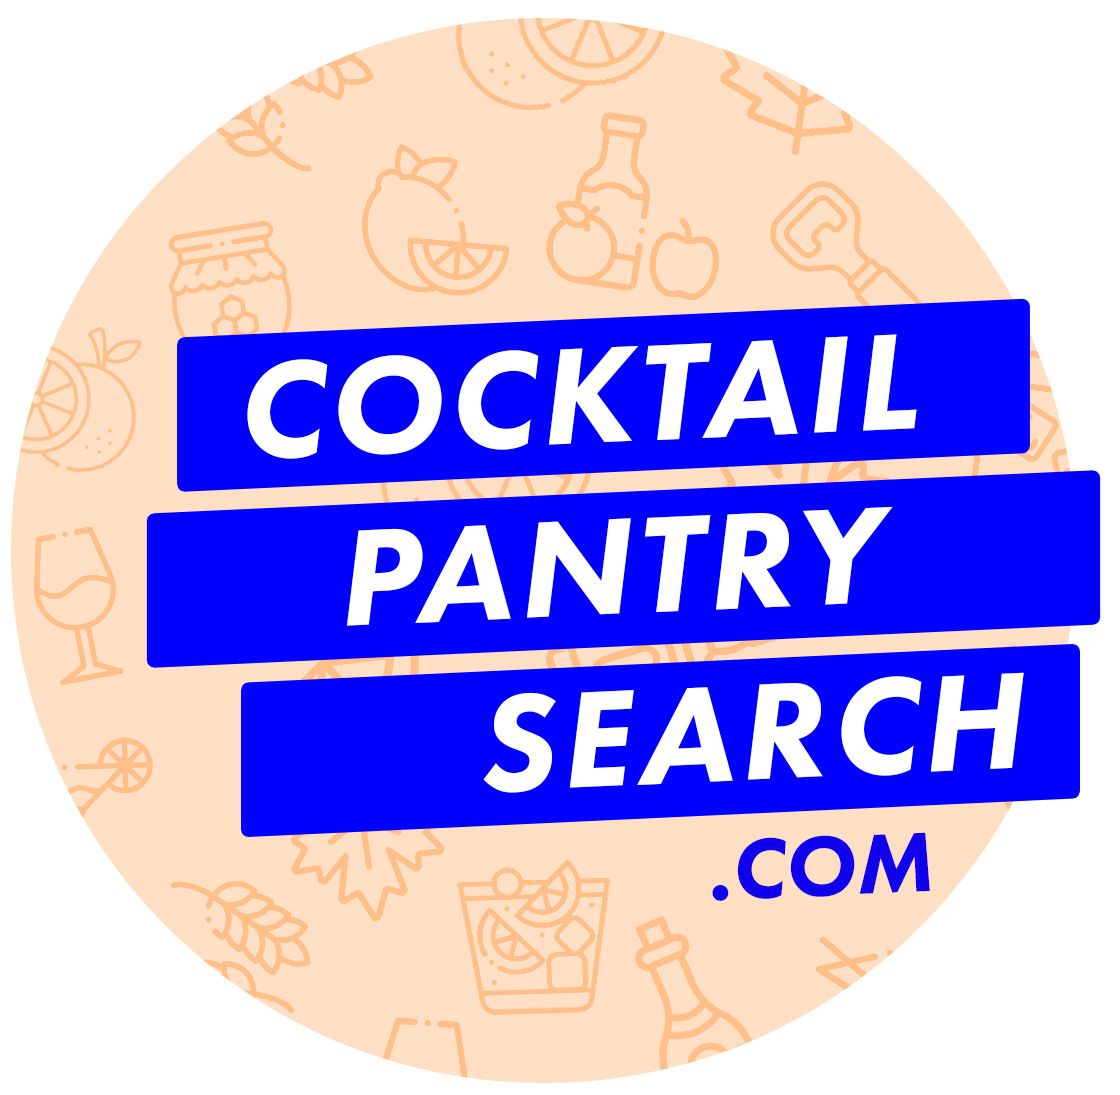 Cocktail Pantry Search